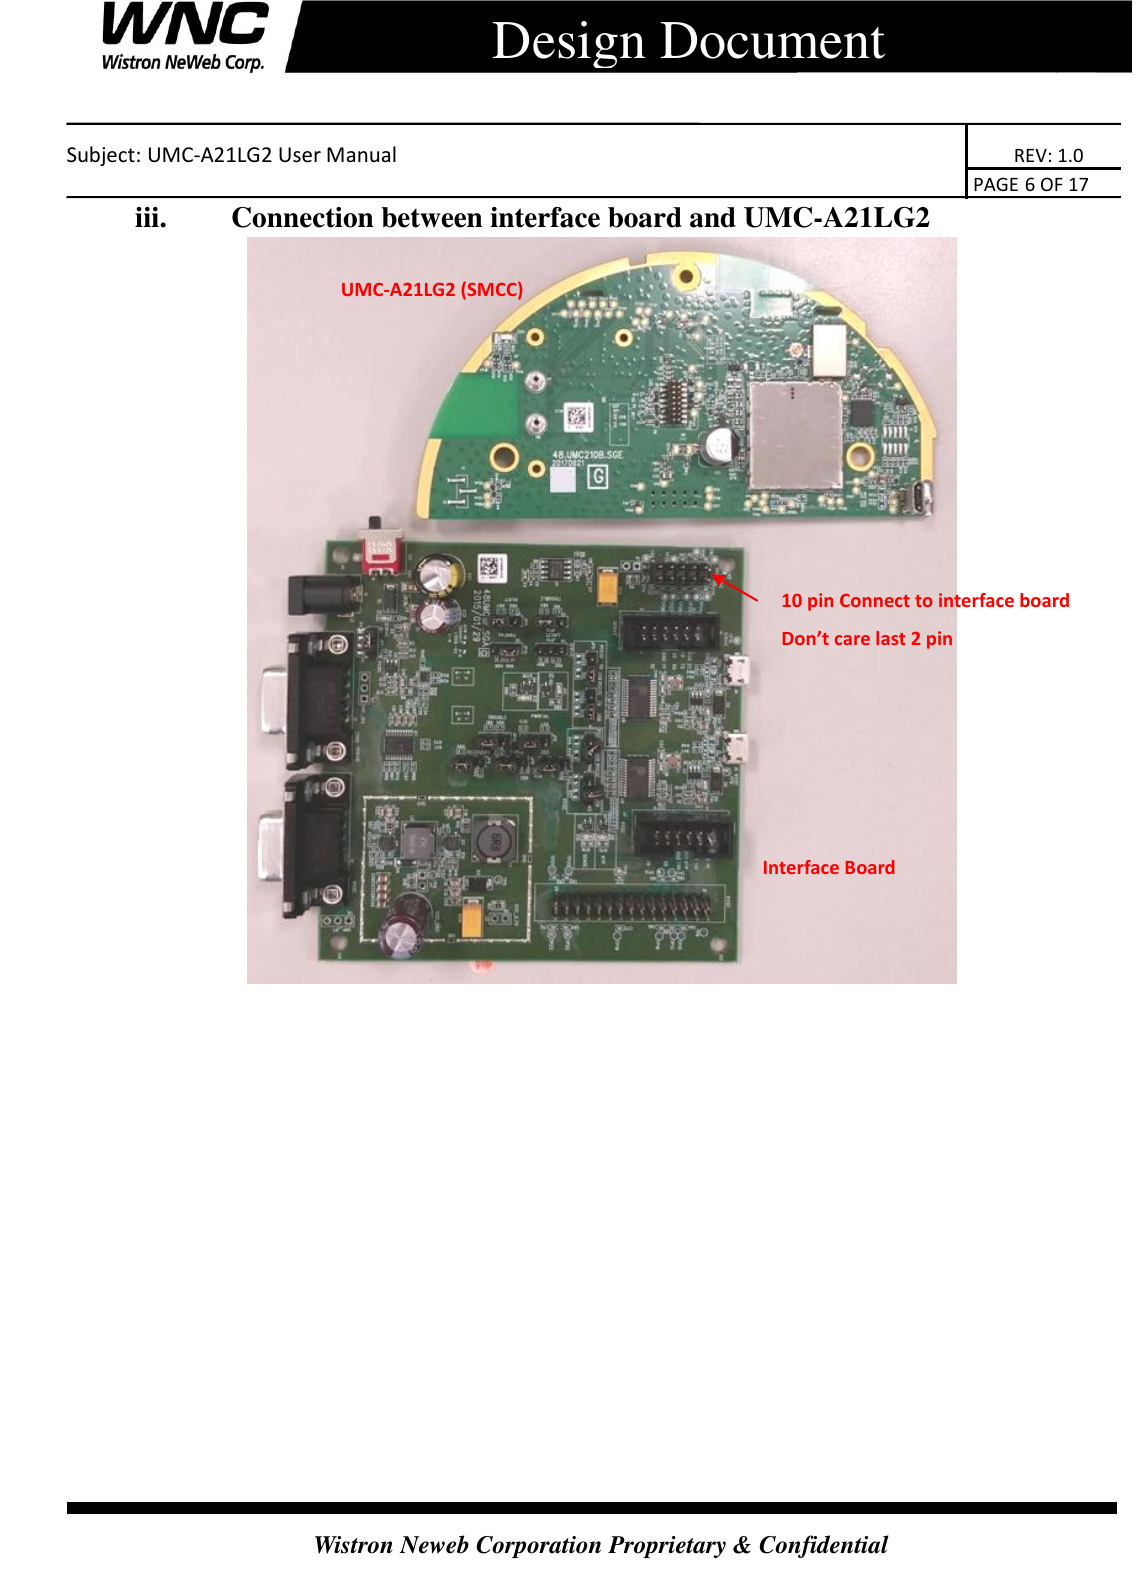    Subject: UMC-A21LG2 User Manual                                                                      REV: 1.0                                                                                        PAGE 6 OF 17  Wistron Neweb Corporation Proprietary &amp; Confidential      Design Document iii.   Connection between interface board and UMC-A21LG2   10 pin Connect to interface board Don’t care last 2 pin UMC-A21LG2 (SMCC) Interface Board   